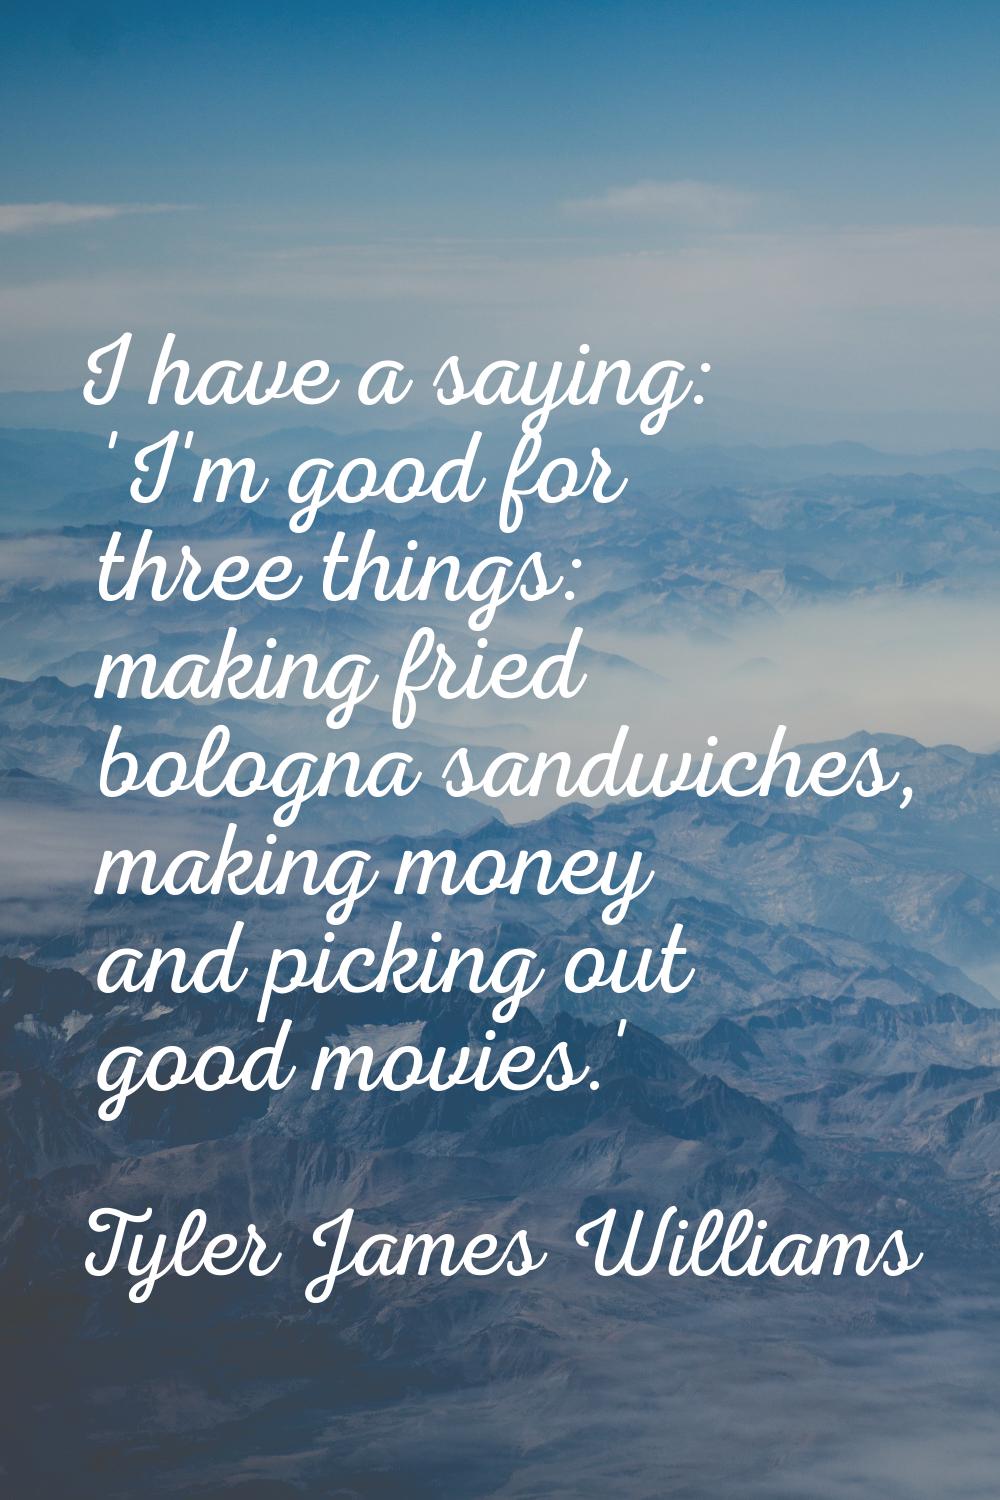 I have a saying: 'I'm good for three things: making fried bologna sandwiches, making money and pick